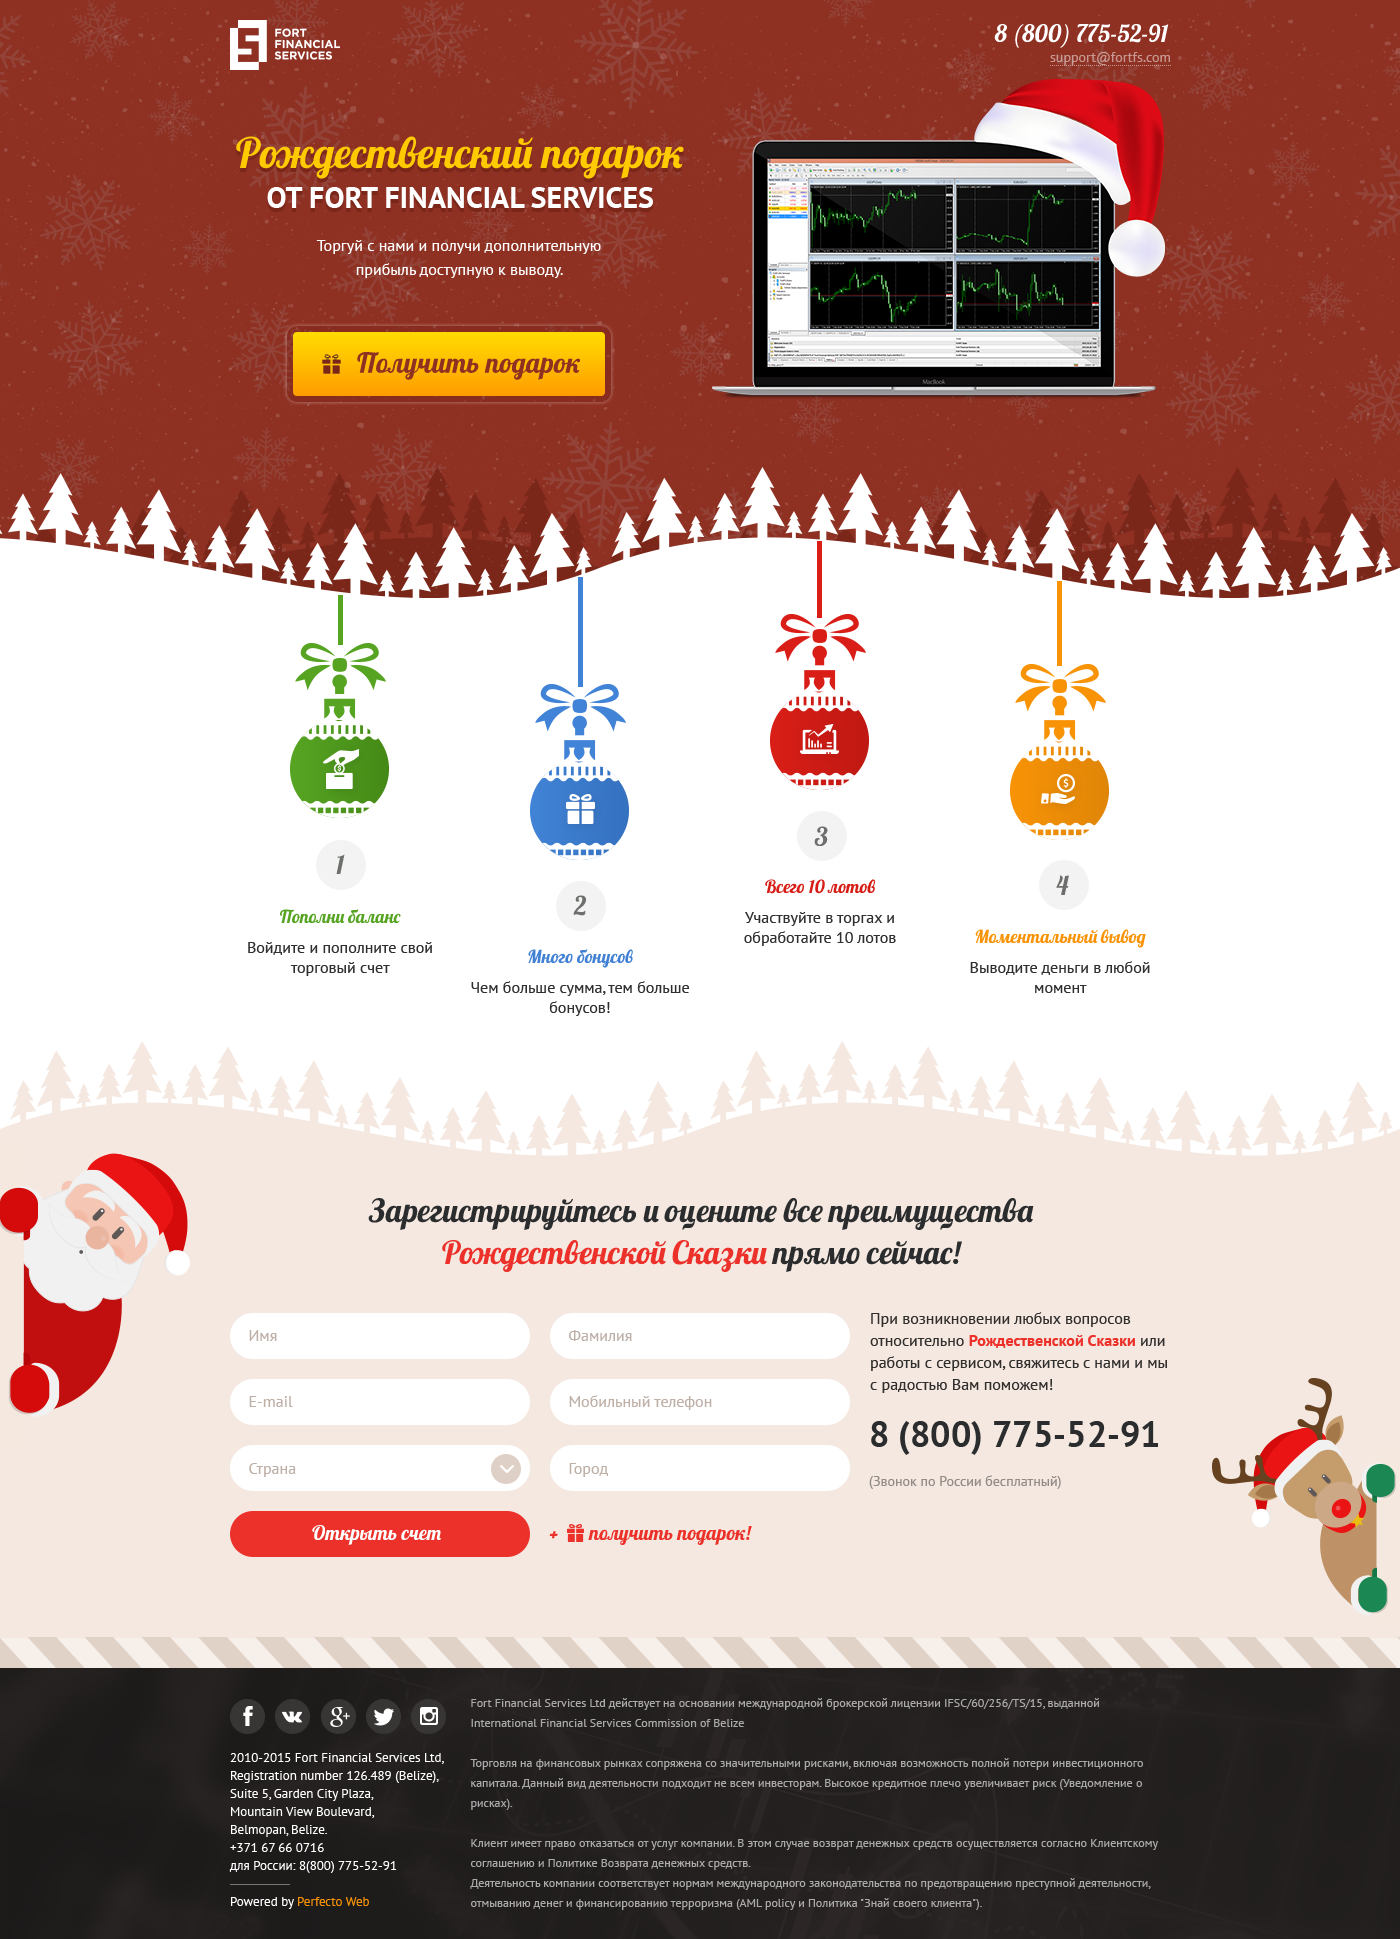 «Christmas tale» landing page №3- Version with different header